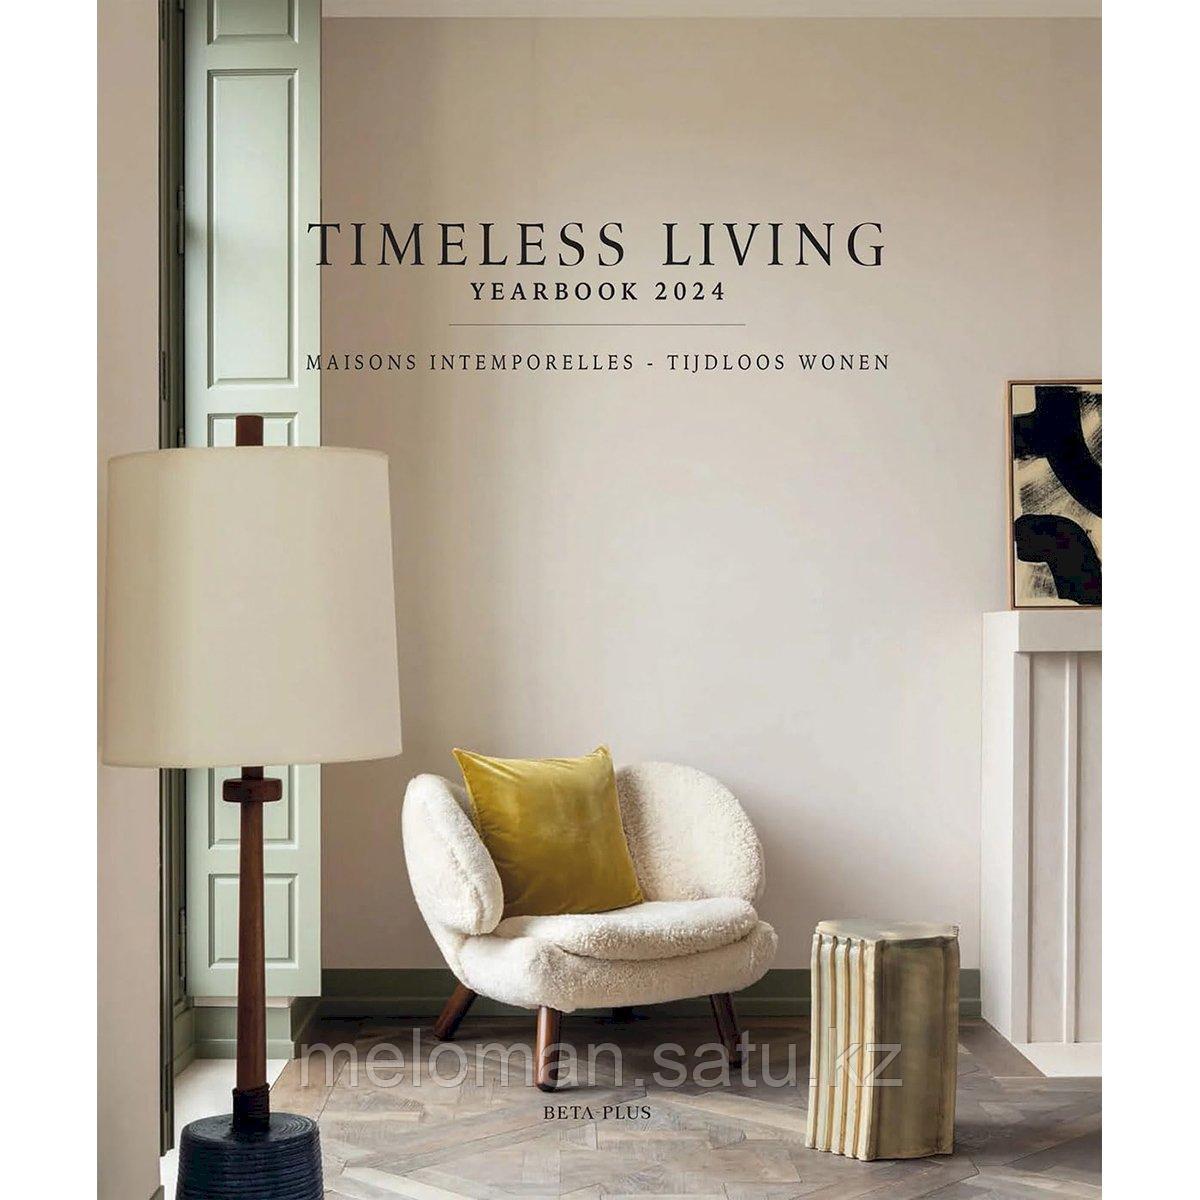 Timeless Living Yearbook 2024 - фото 1 - id-p116143401